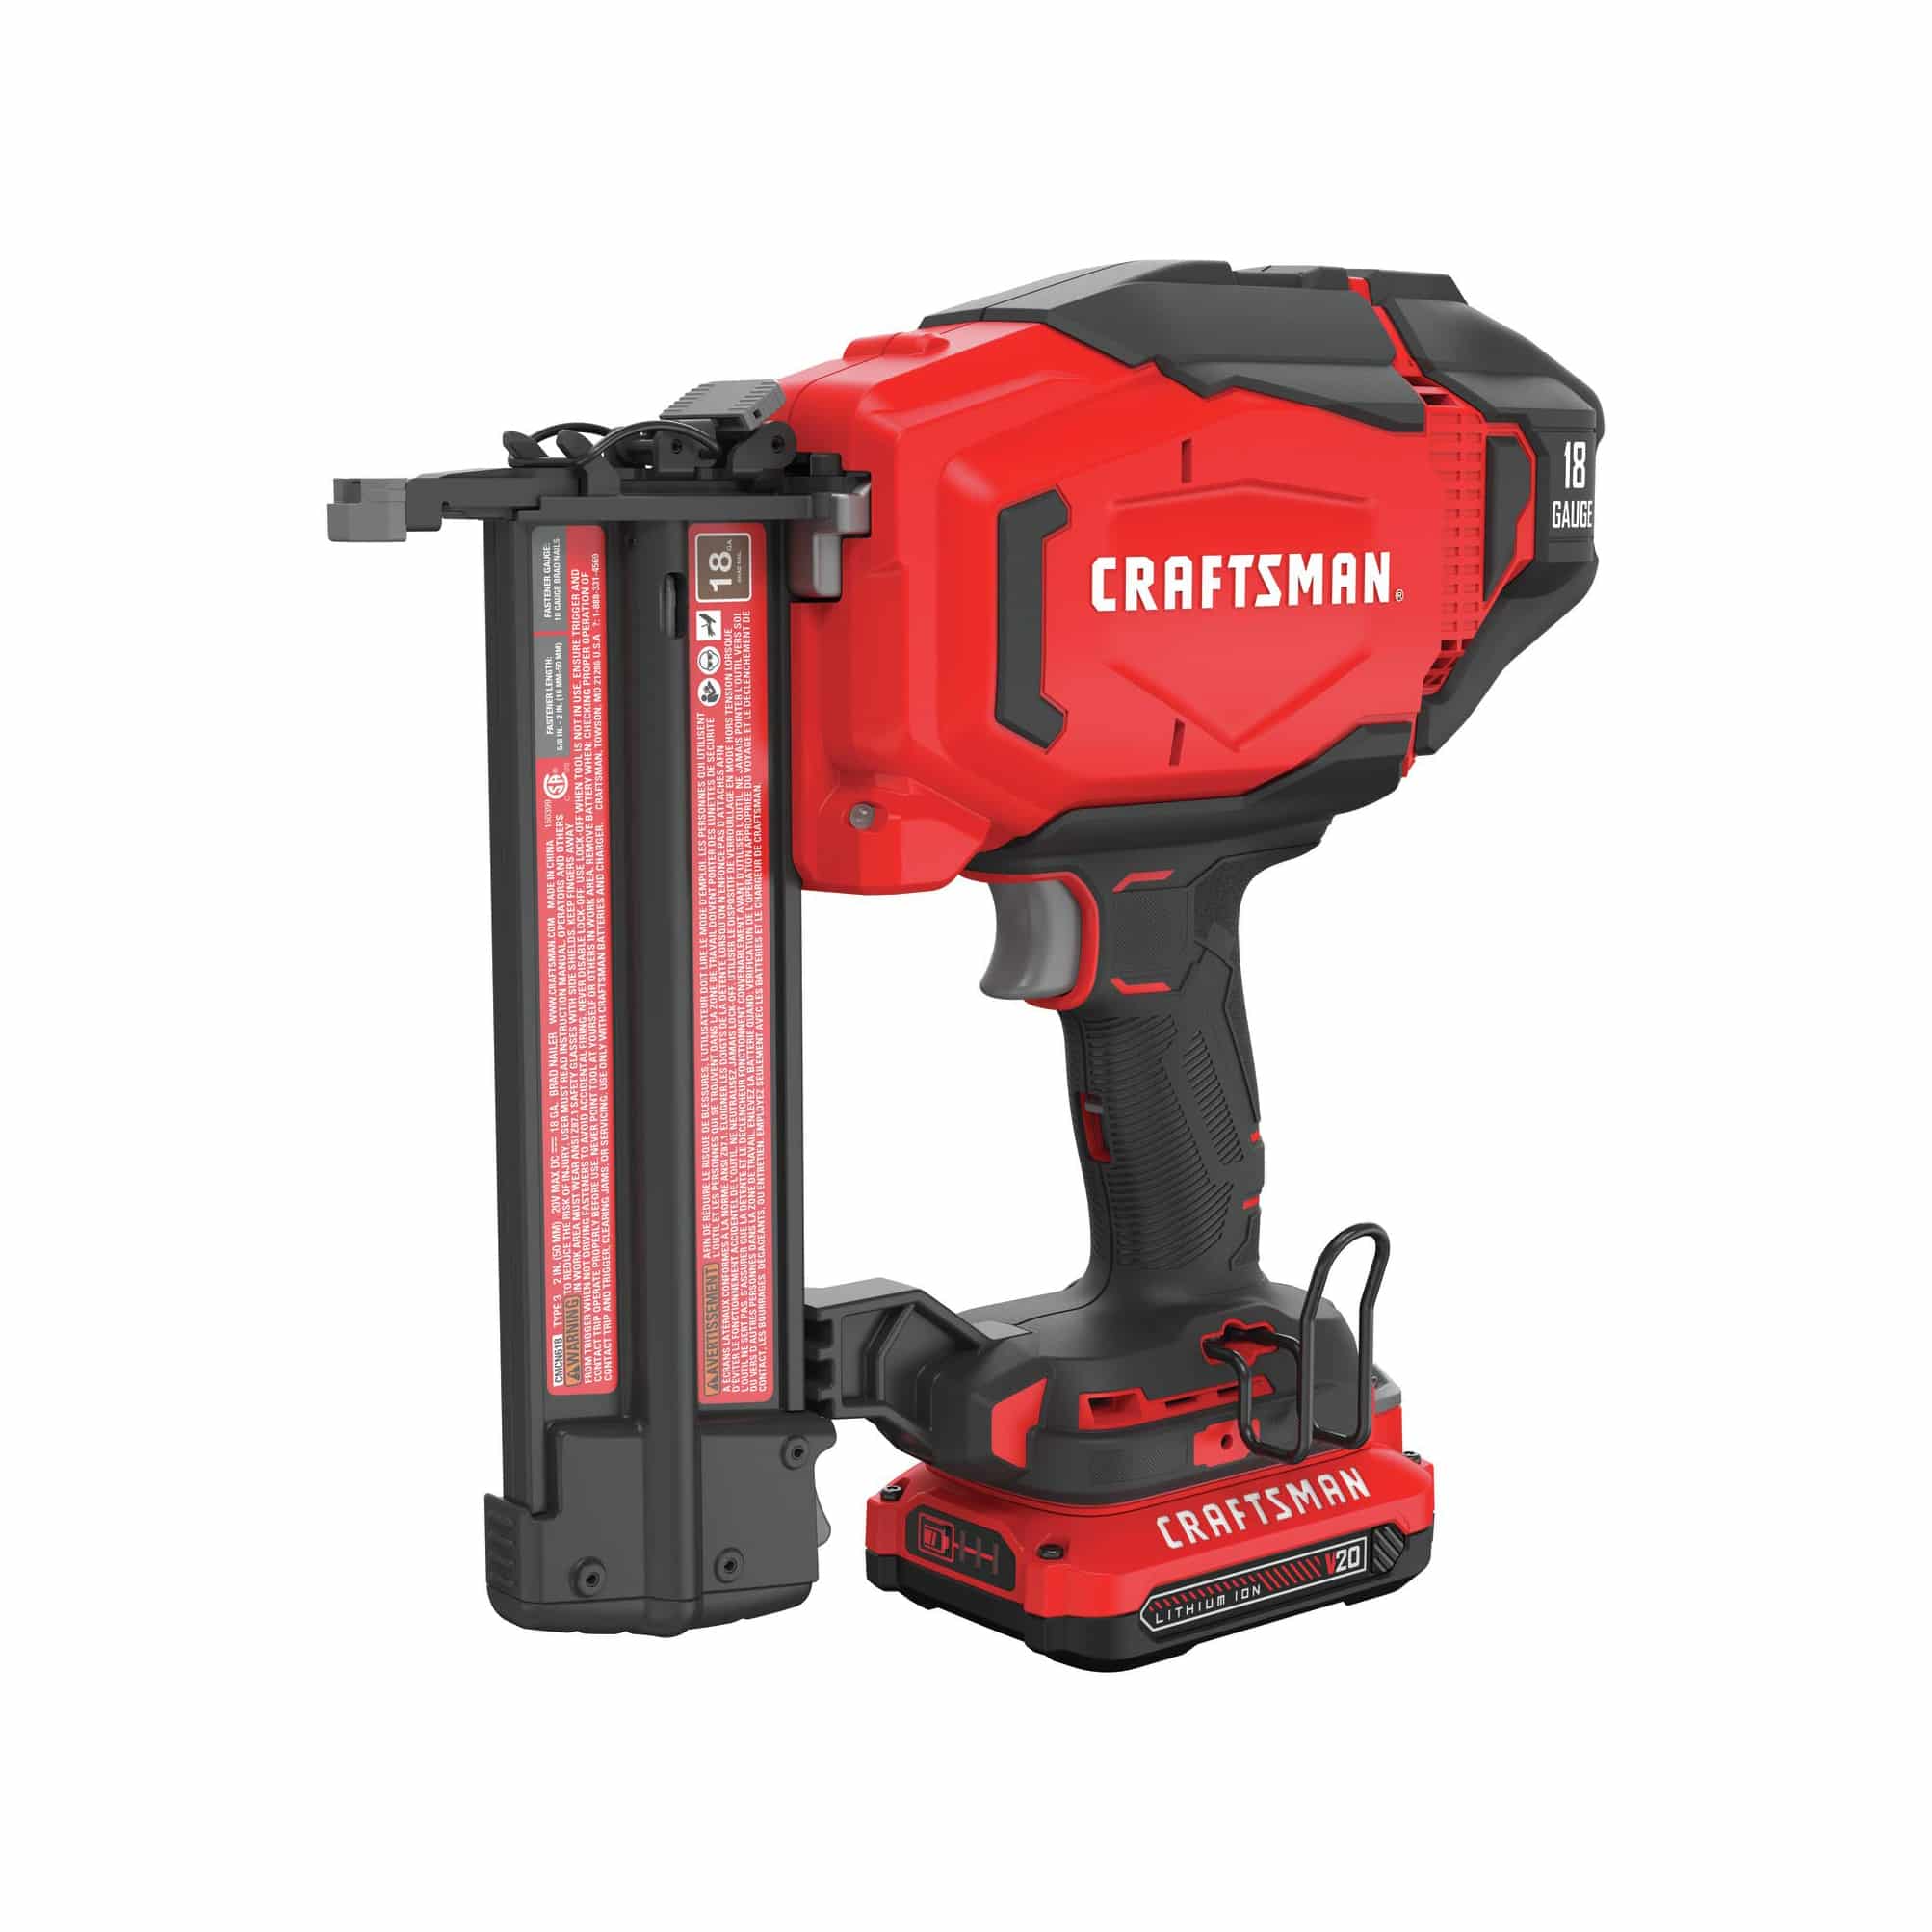 Top 10 Best Electric Nail Guns in 2020 Review | Guide